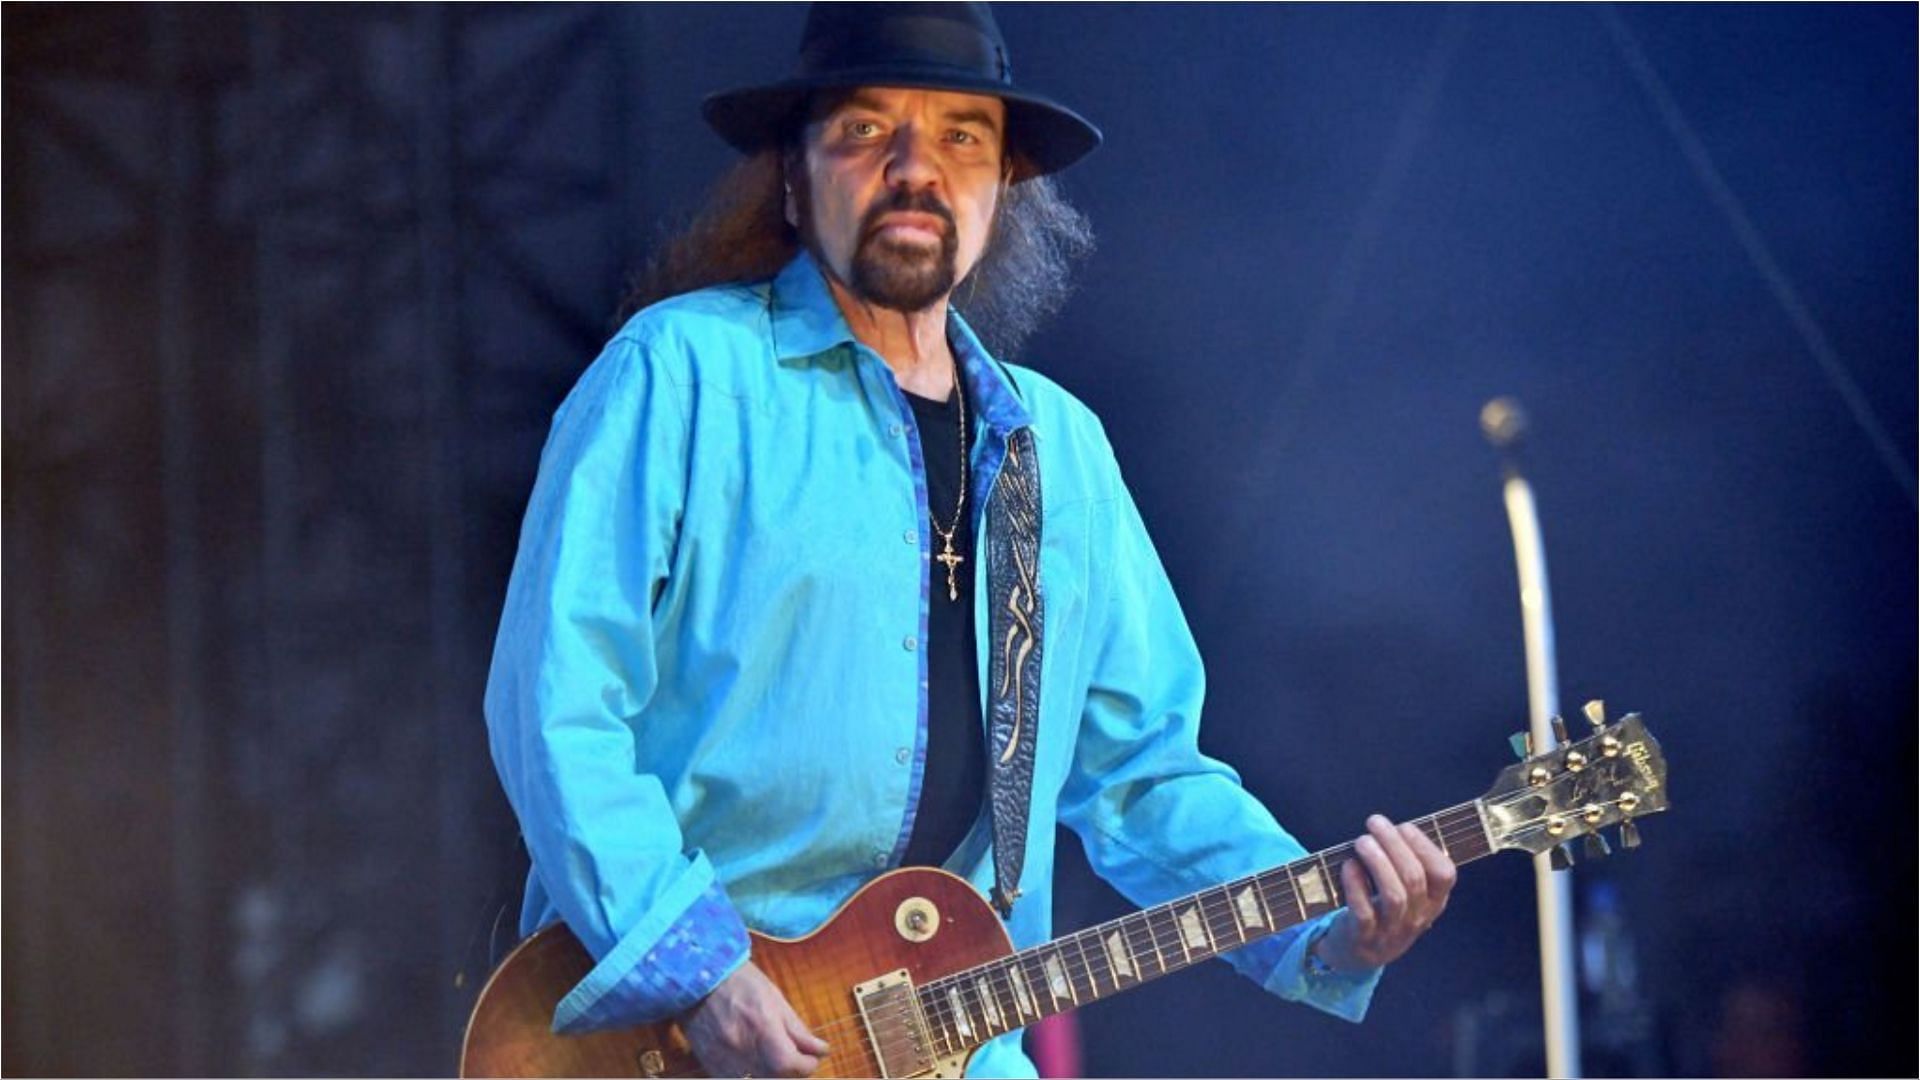 Gary Rossington recently died at the age of 71 (Image via Scott Dudelson/Getty Images)